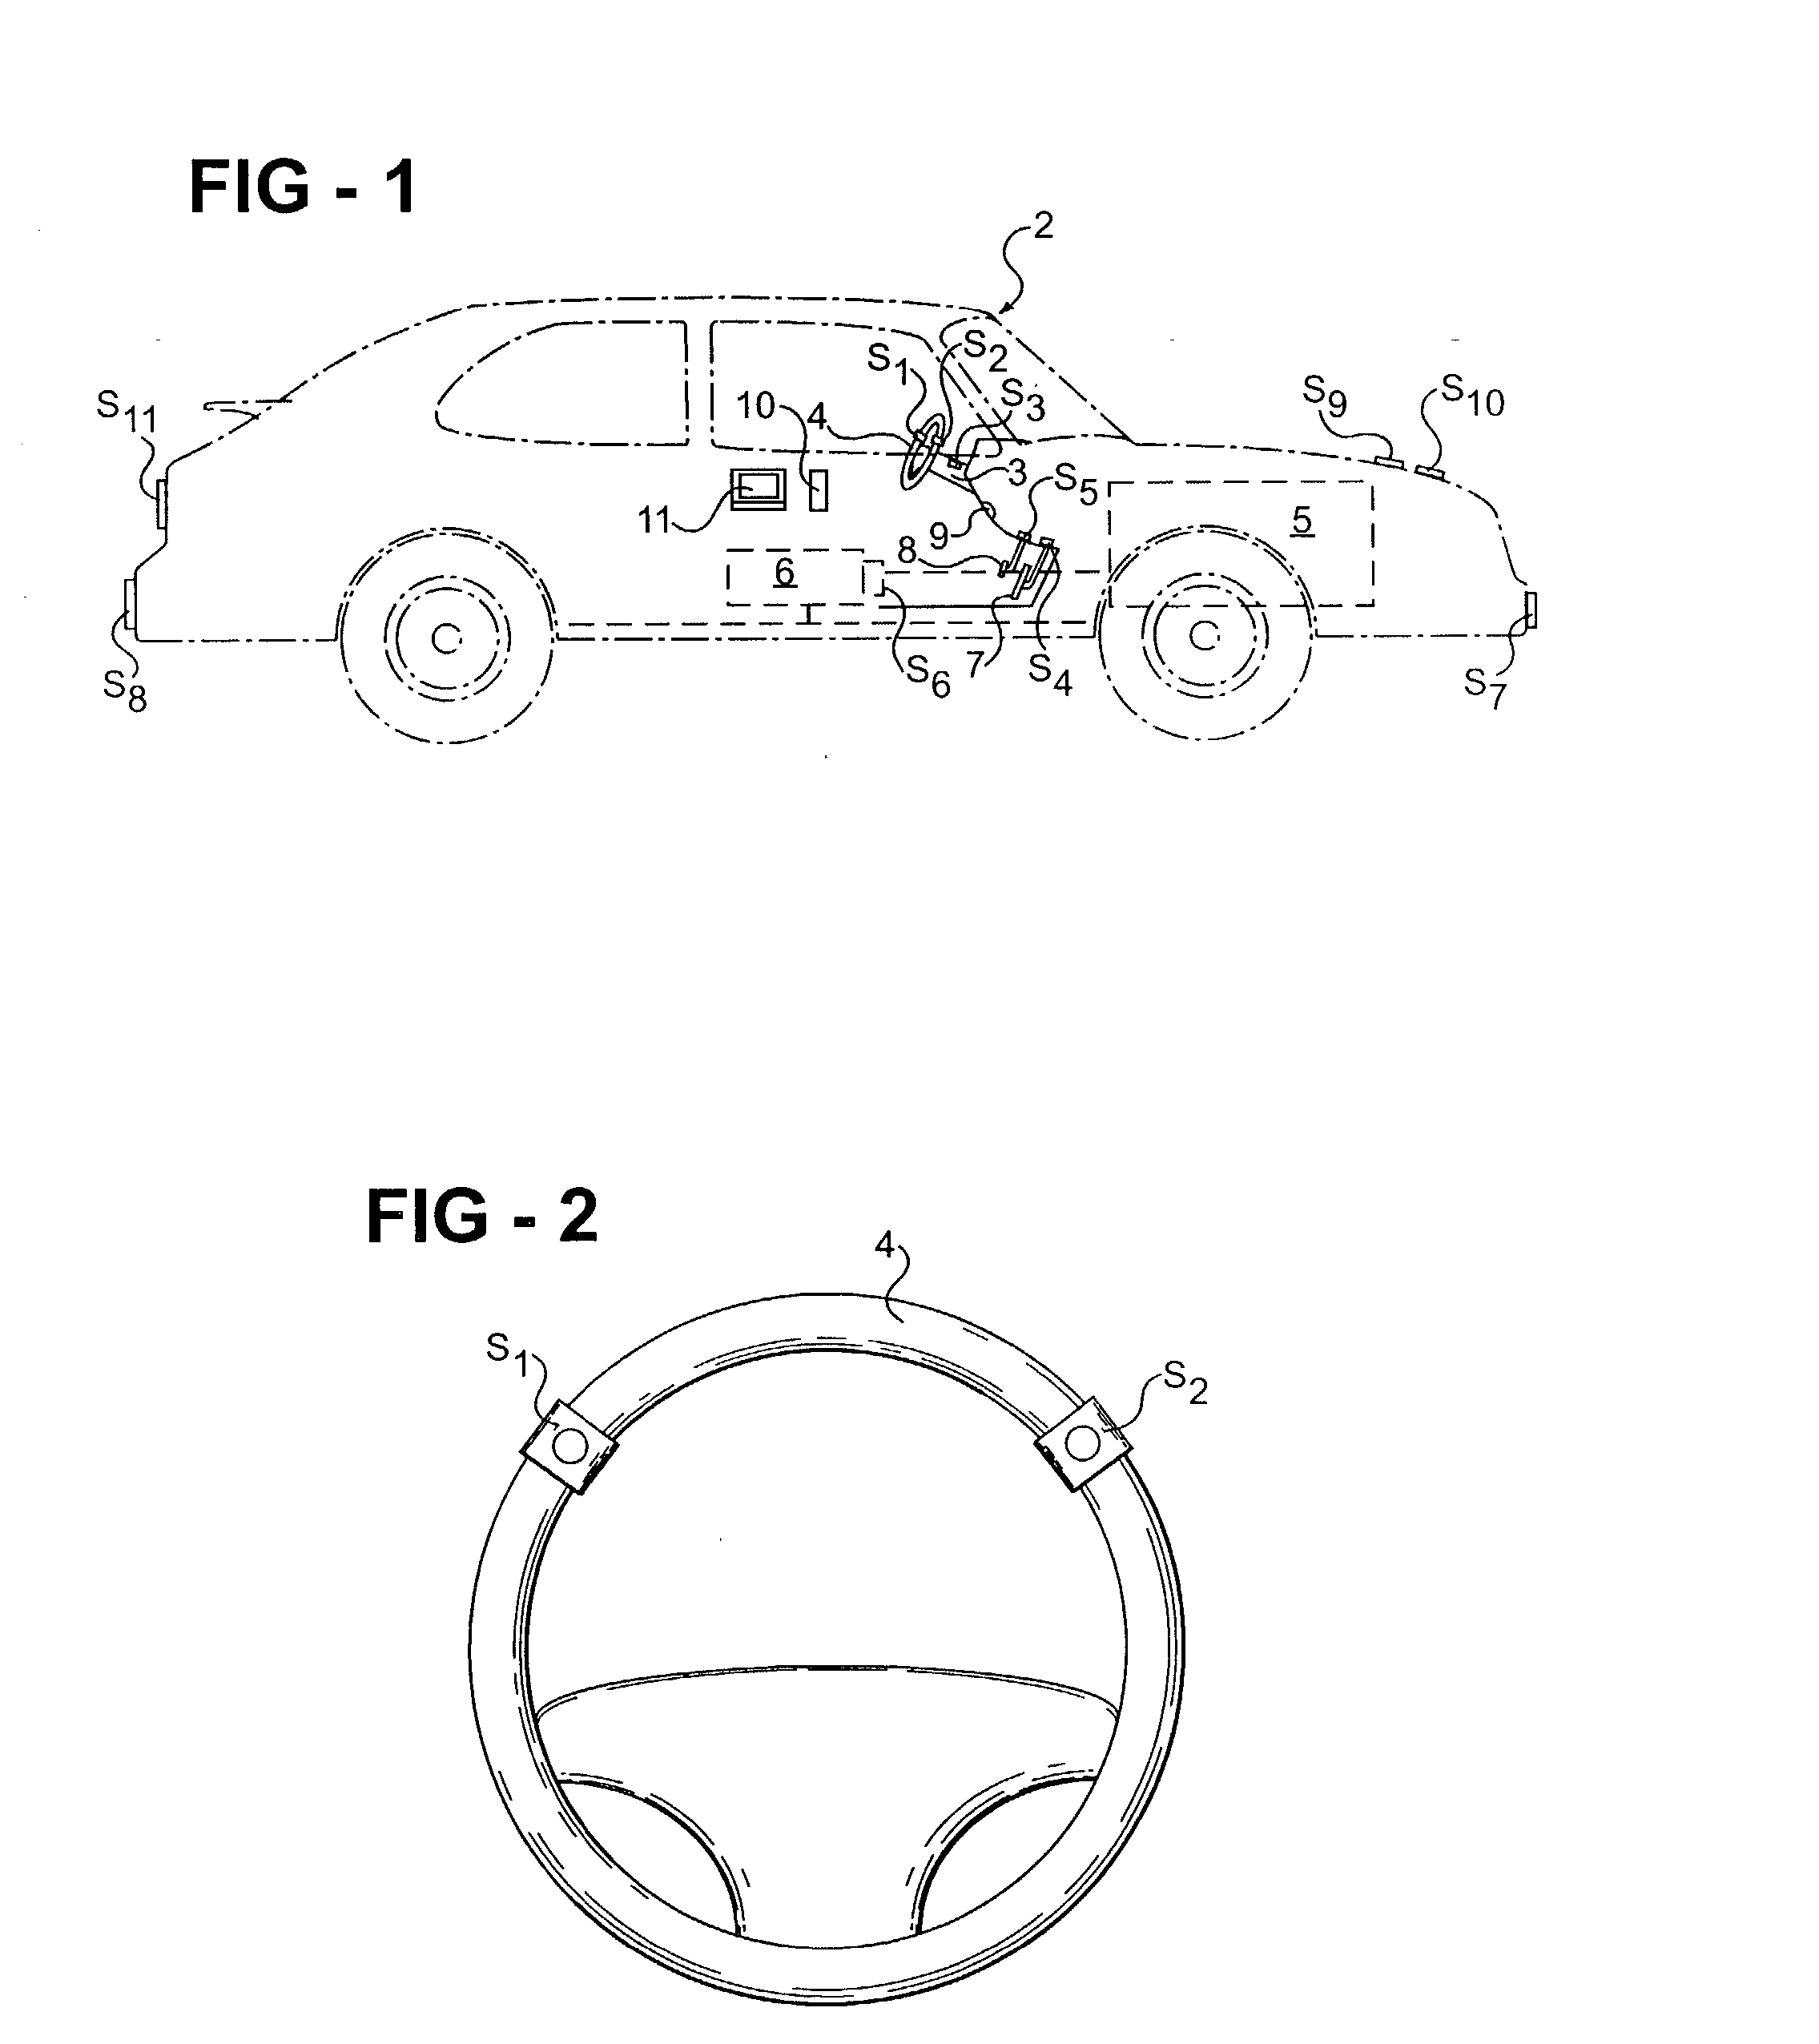 Safety control system for vehicles